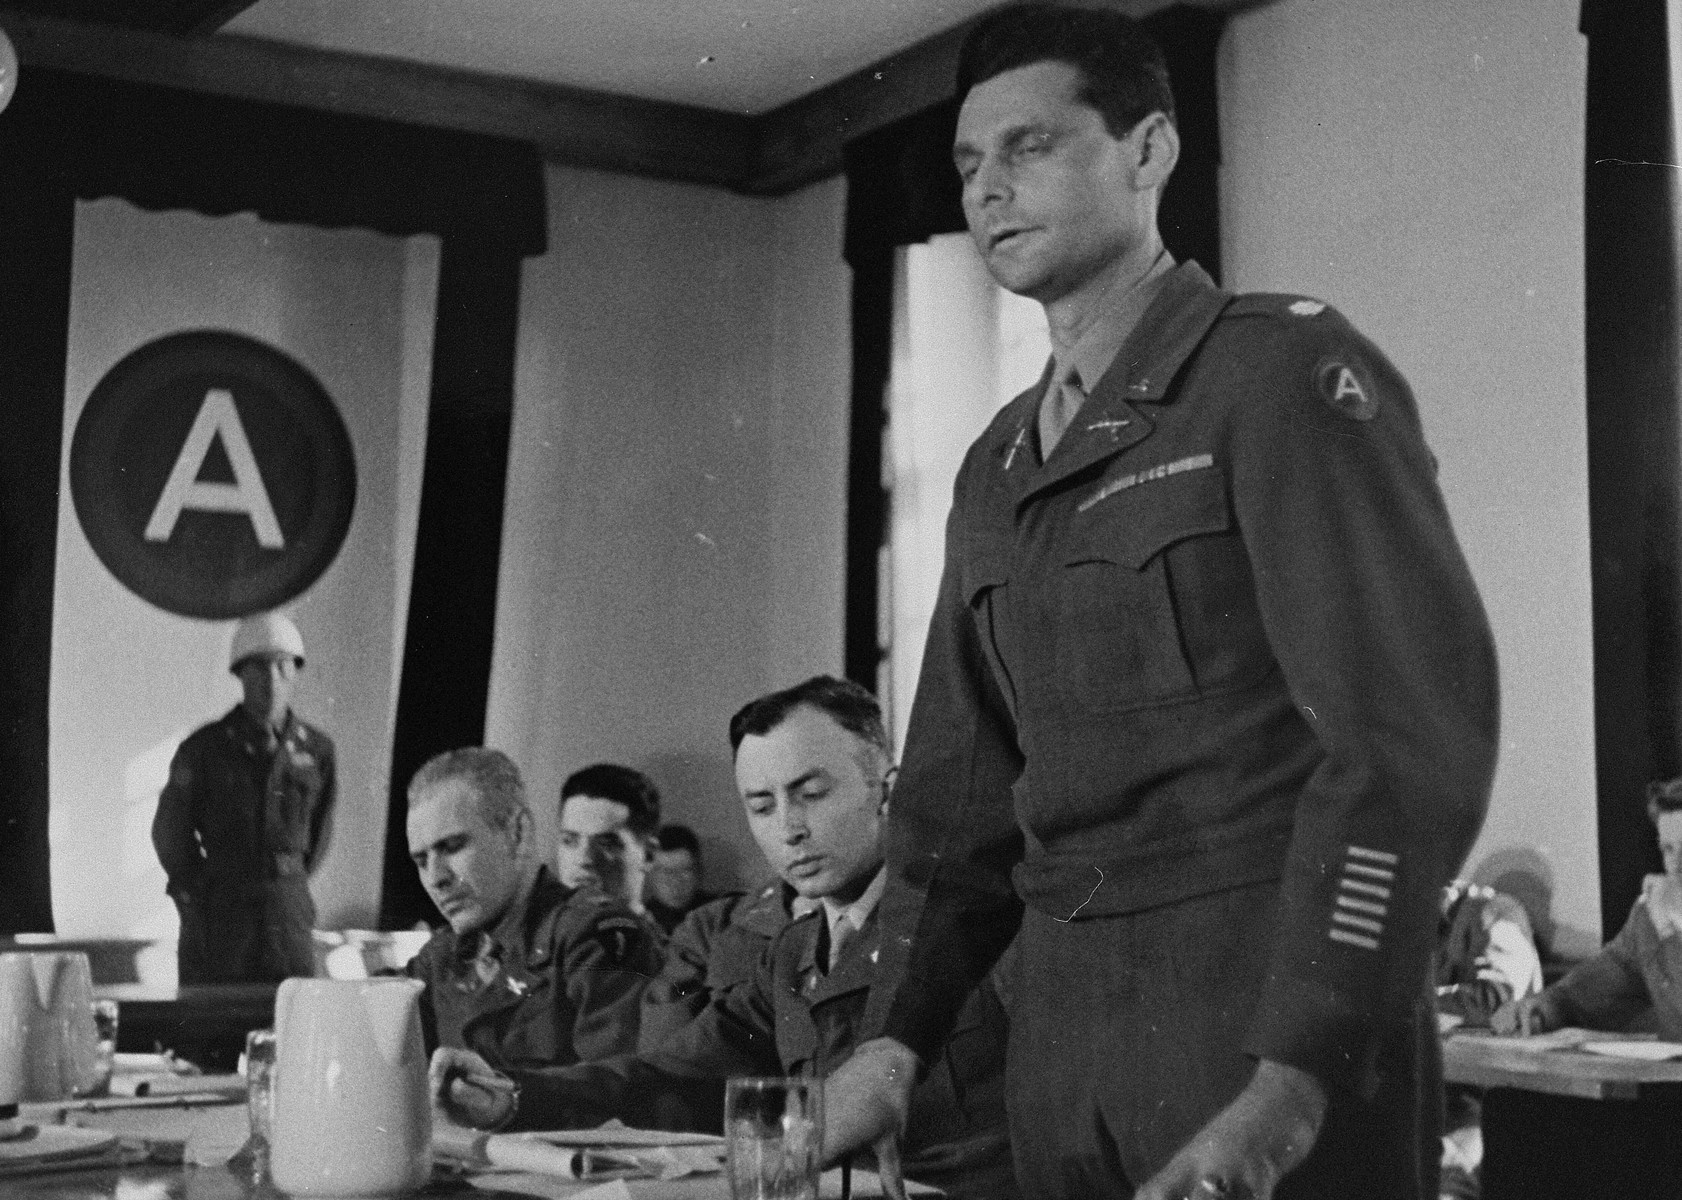 The American prosecution team at the trial of 61 former camp personnel and prisoners from Mauthausen.  

Among those pictured is William Denson (seated in the middle next to the lawyer who is standing).